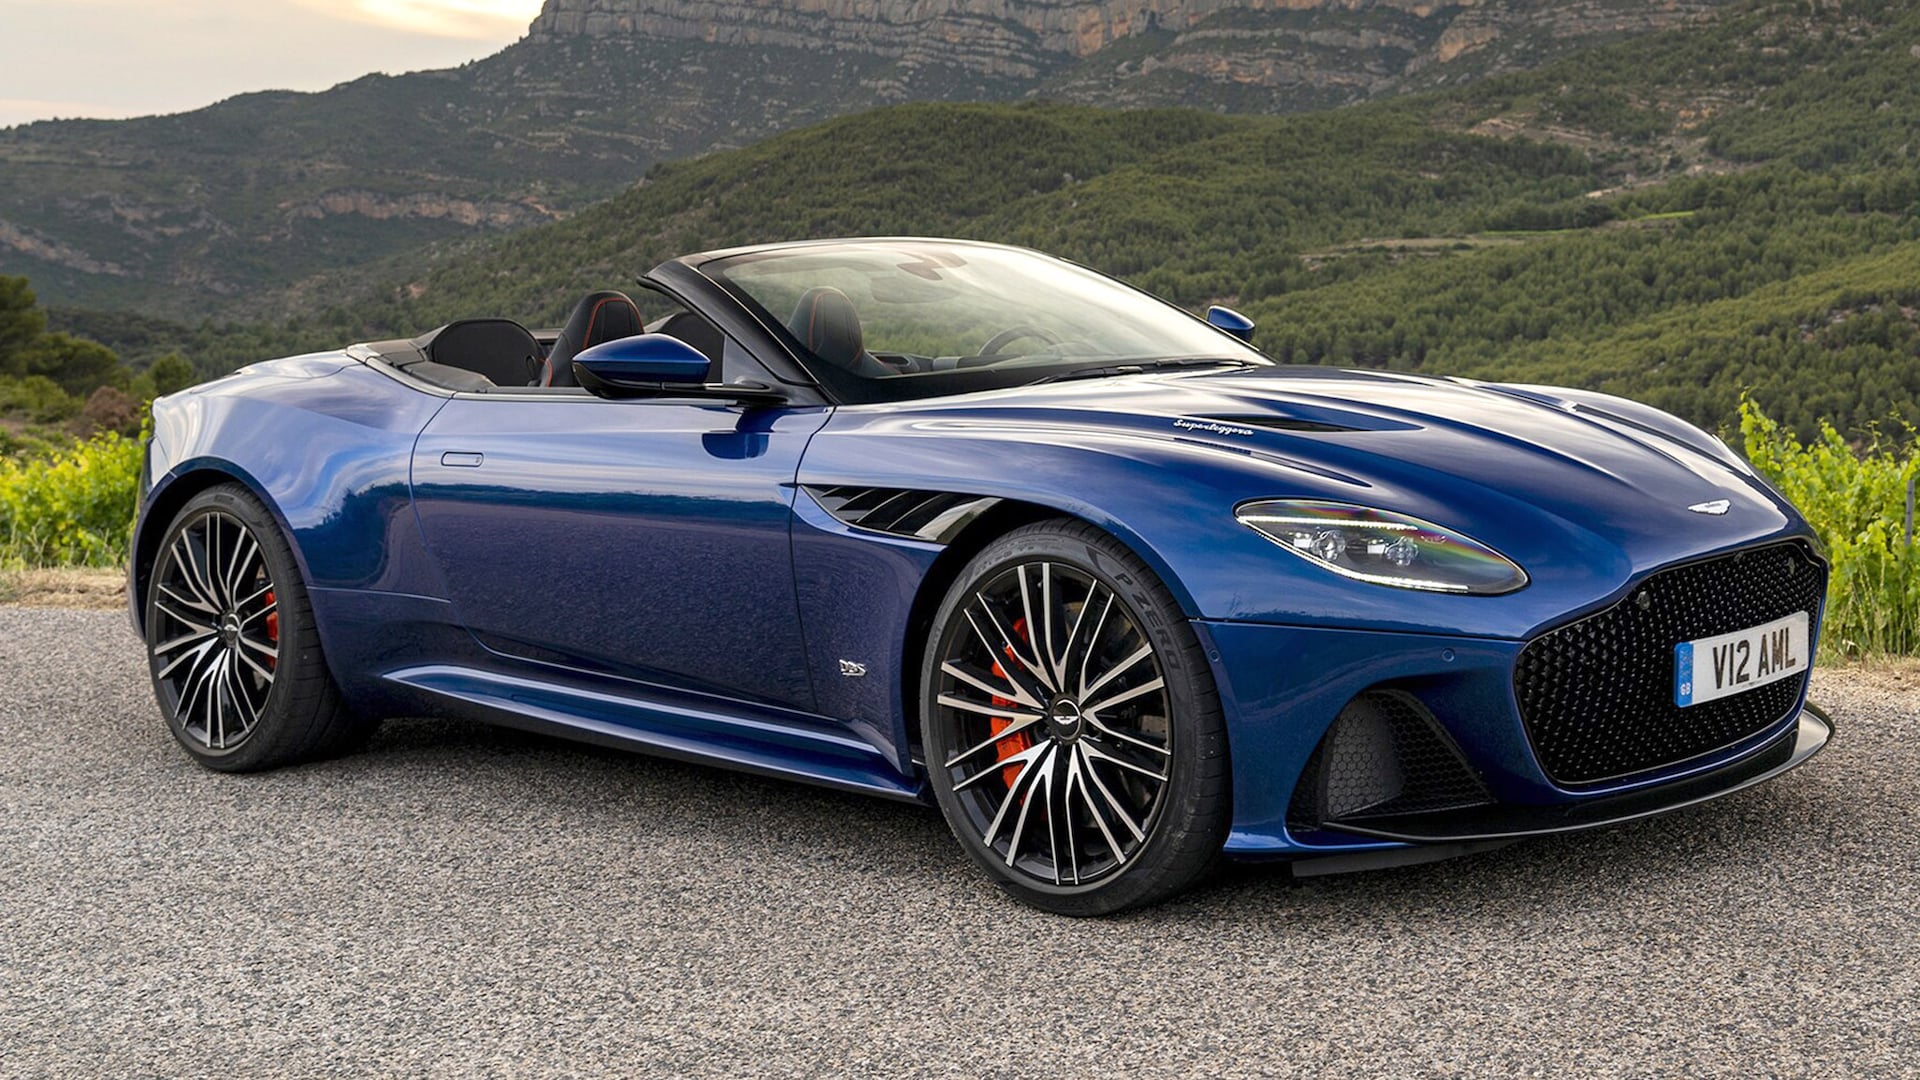 2023 Aston Martin DBS Prices, Reviews, and Photos - MotorTrend